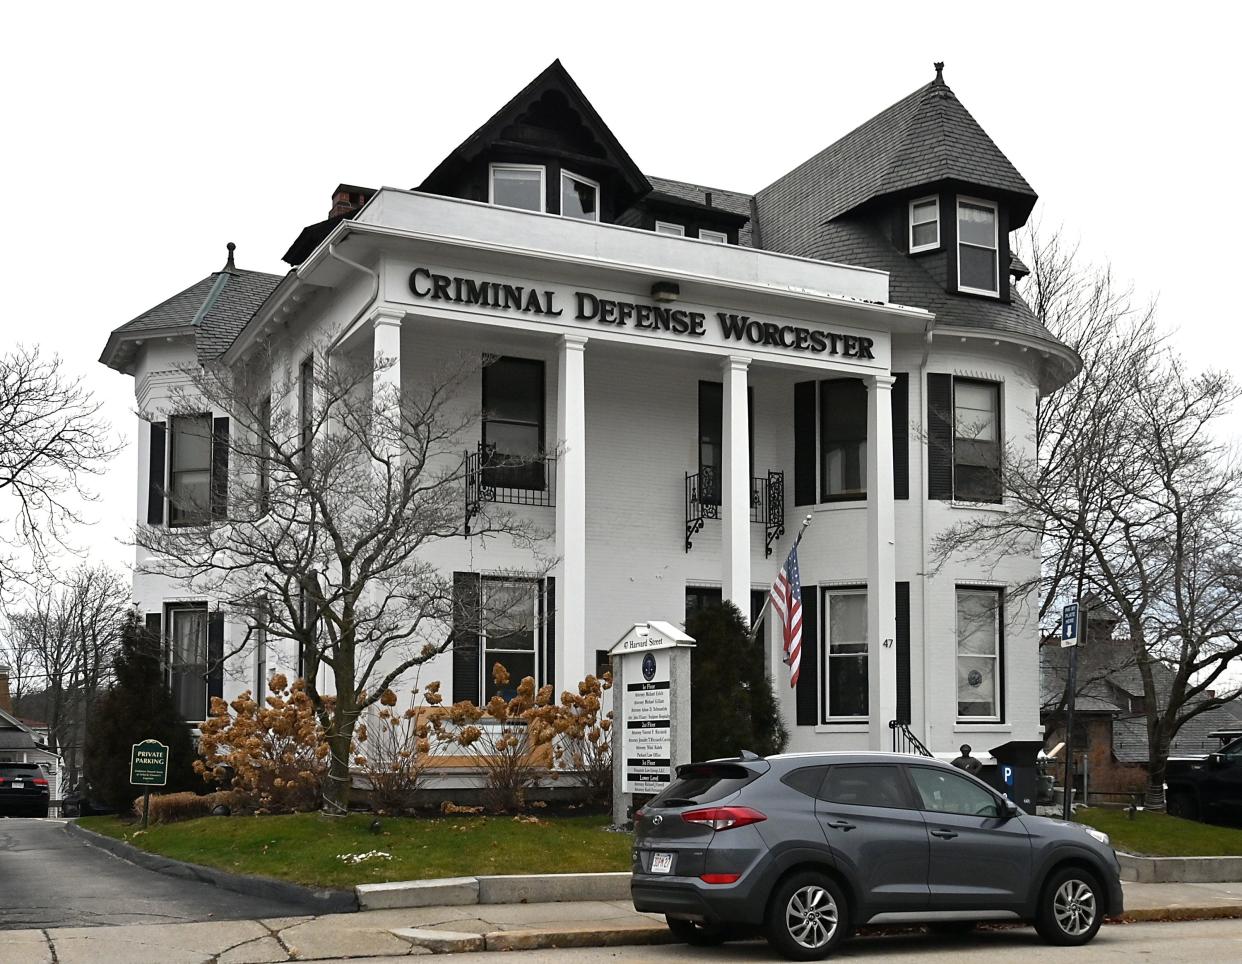 Private lawyers have been the former funeral home's main tenants in recent years.